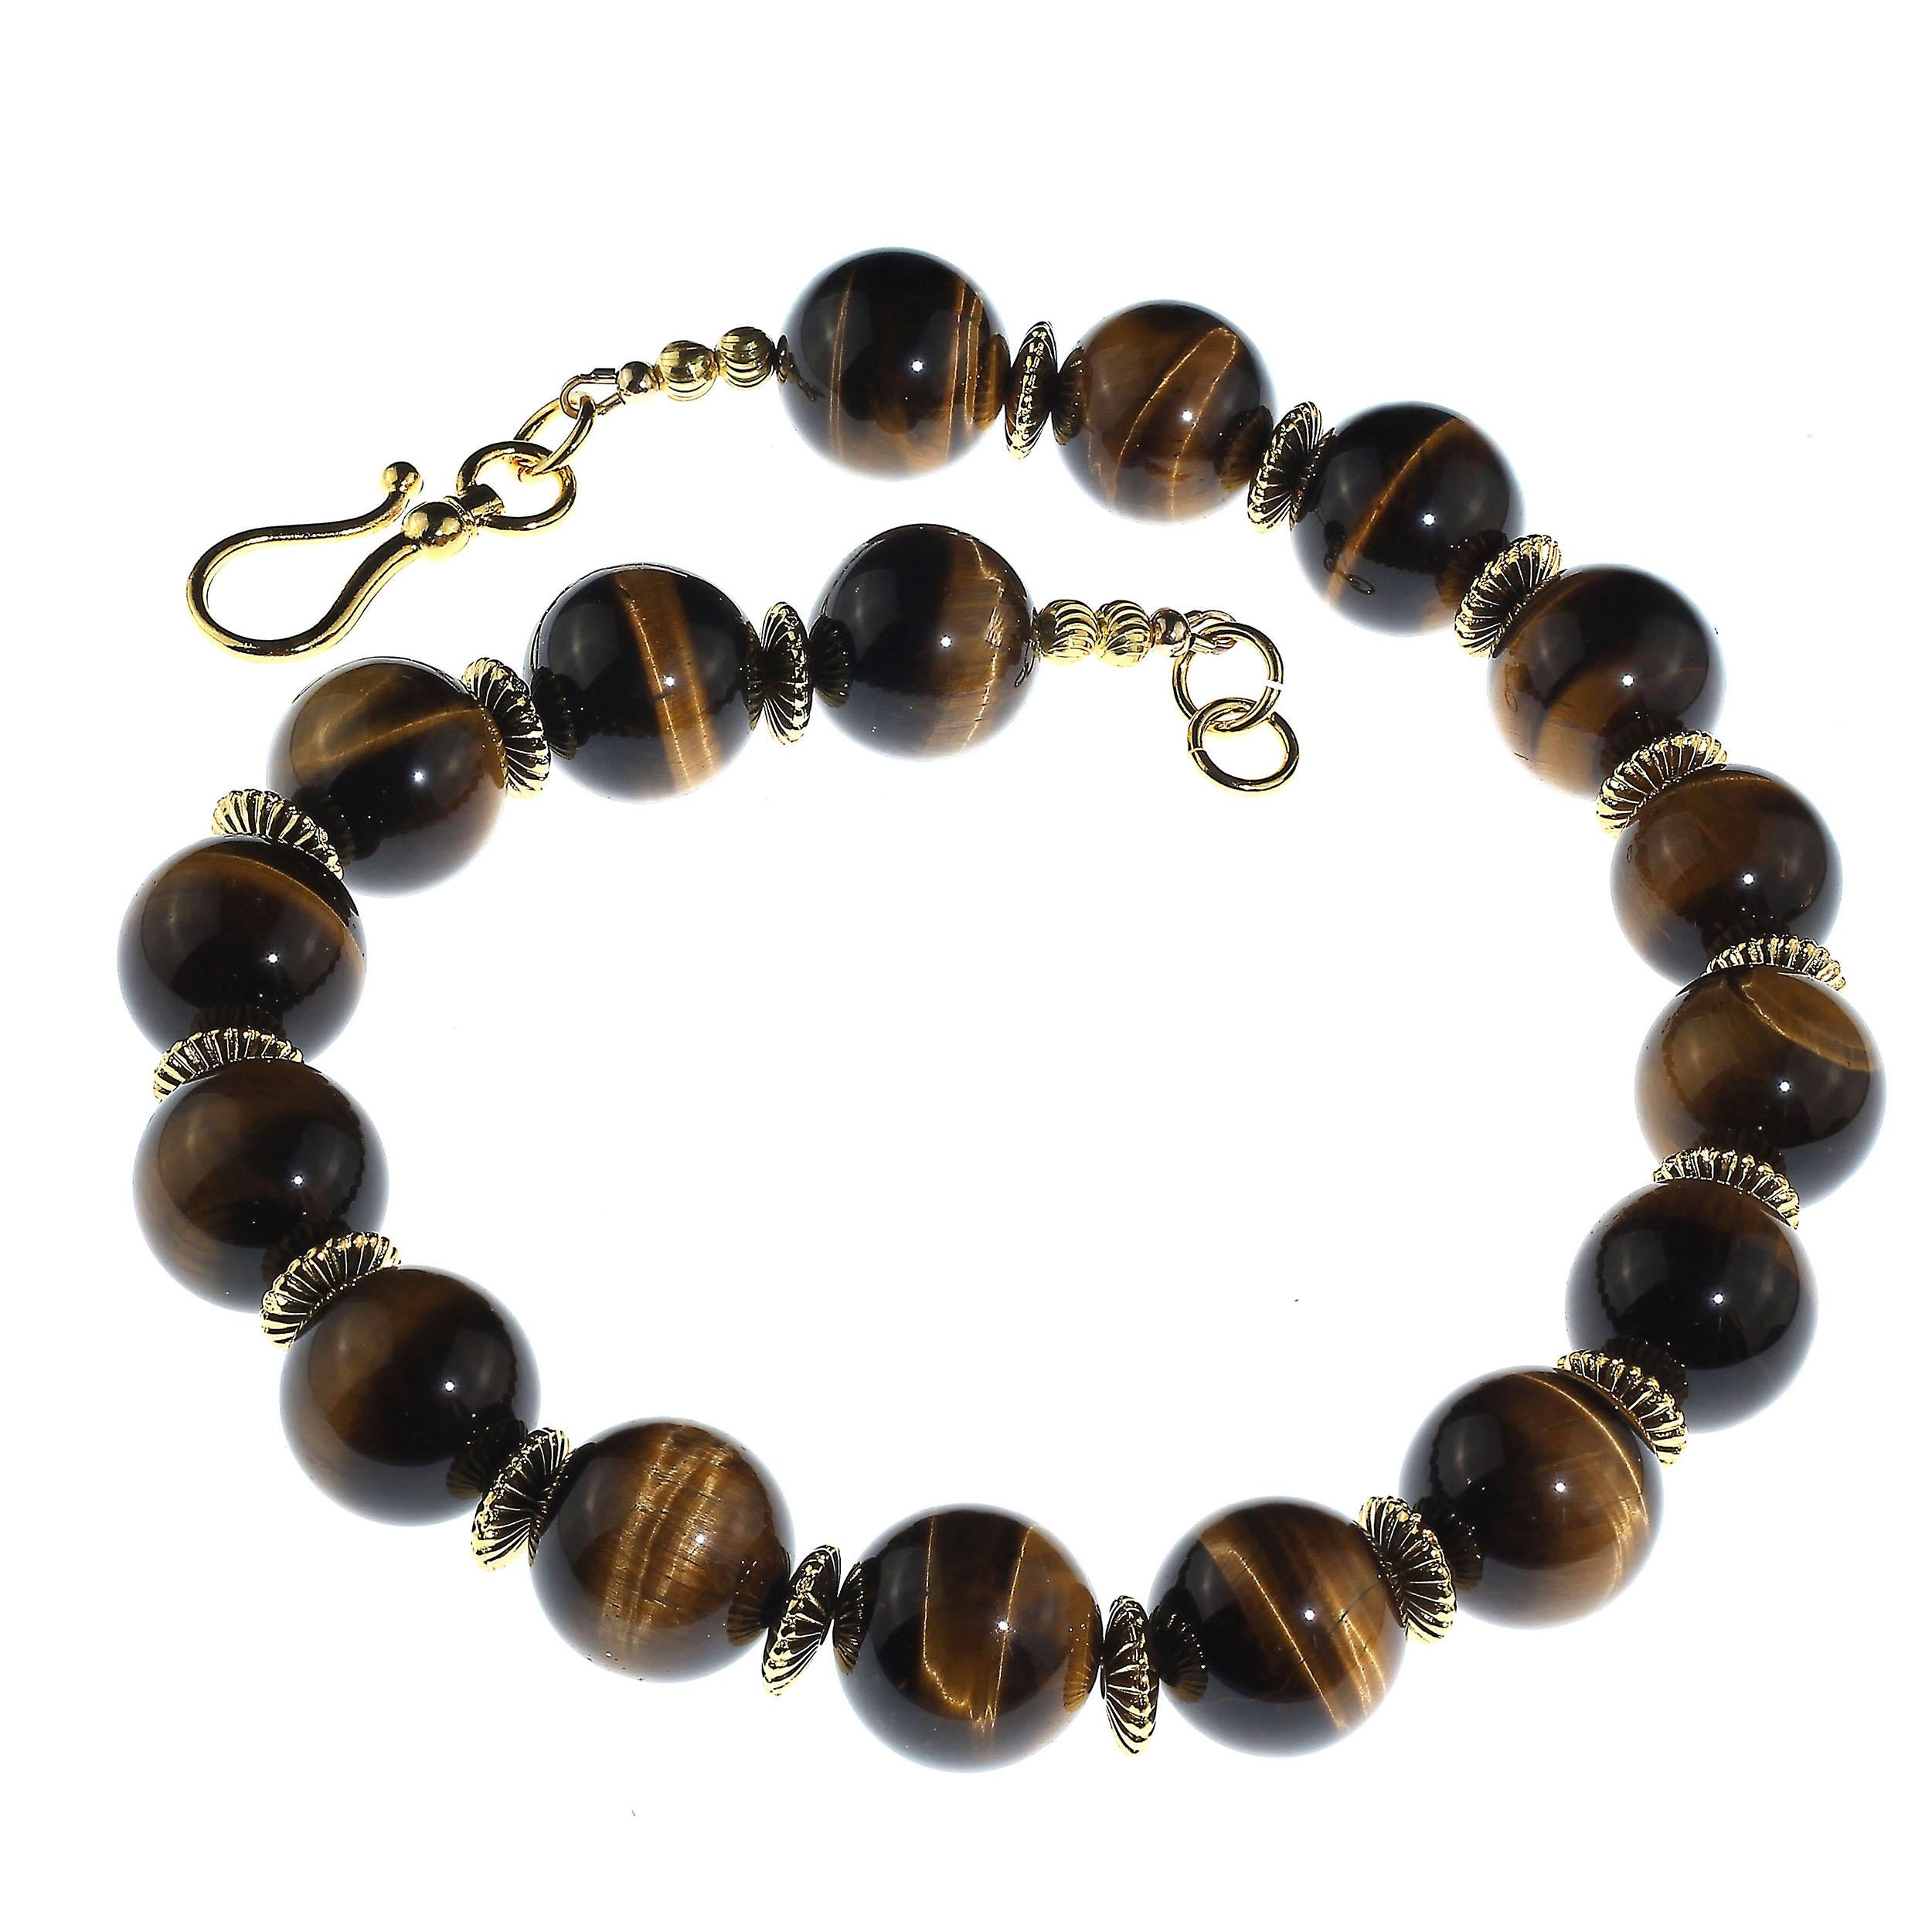 Artisan AJD Statement Necklace of Magnificent Glowing Tiger's Eye